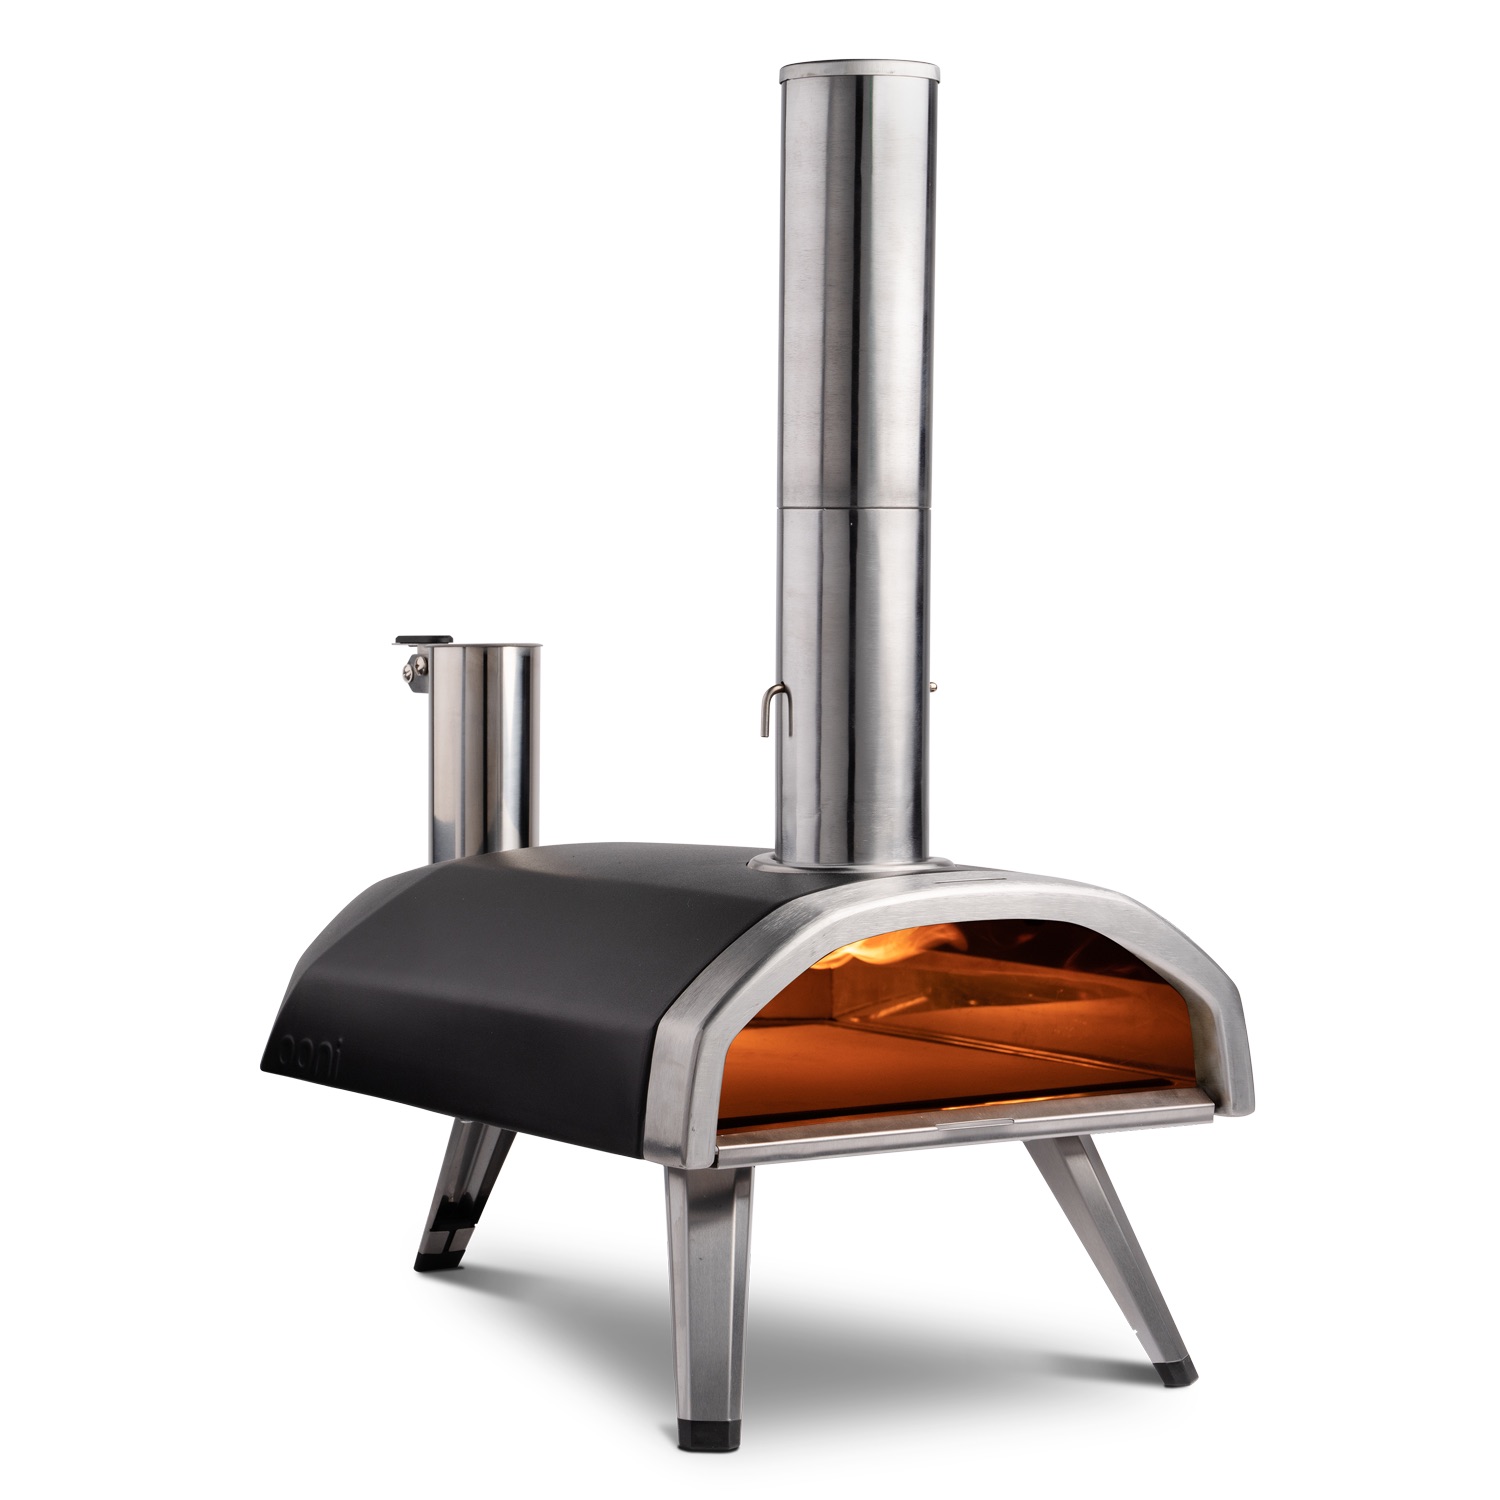 Ooni Fyra’s 12-inch Wood Pellet Outdoor Pizza Oven from Ace Hardware